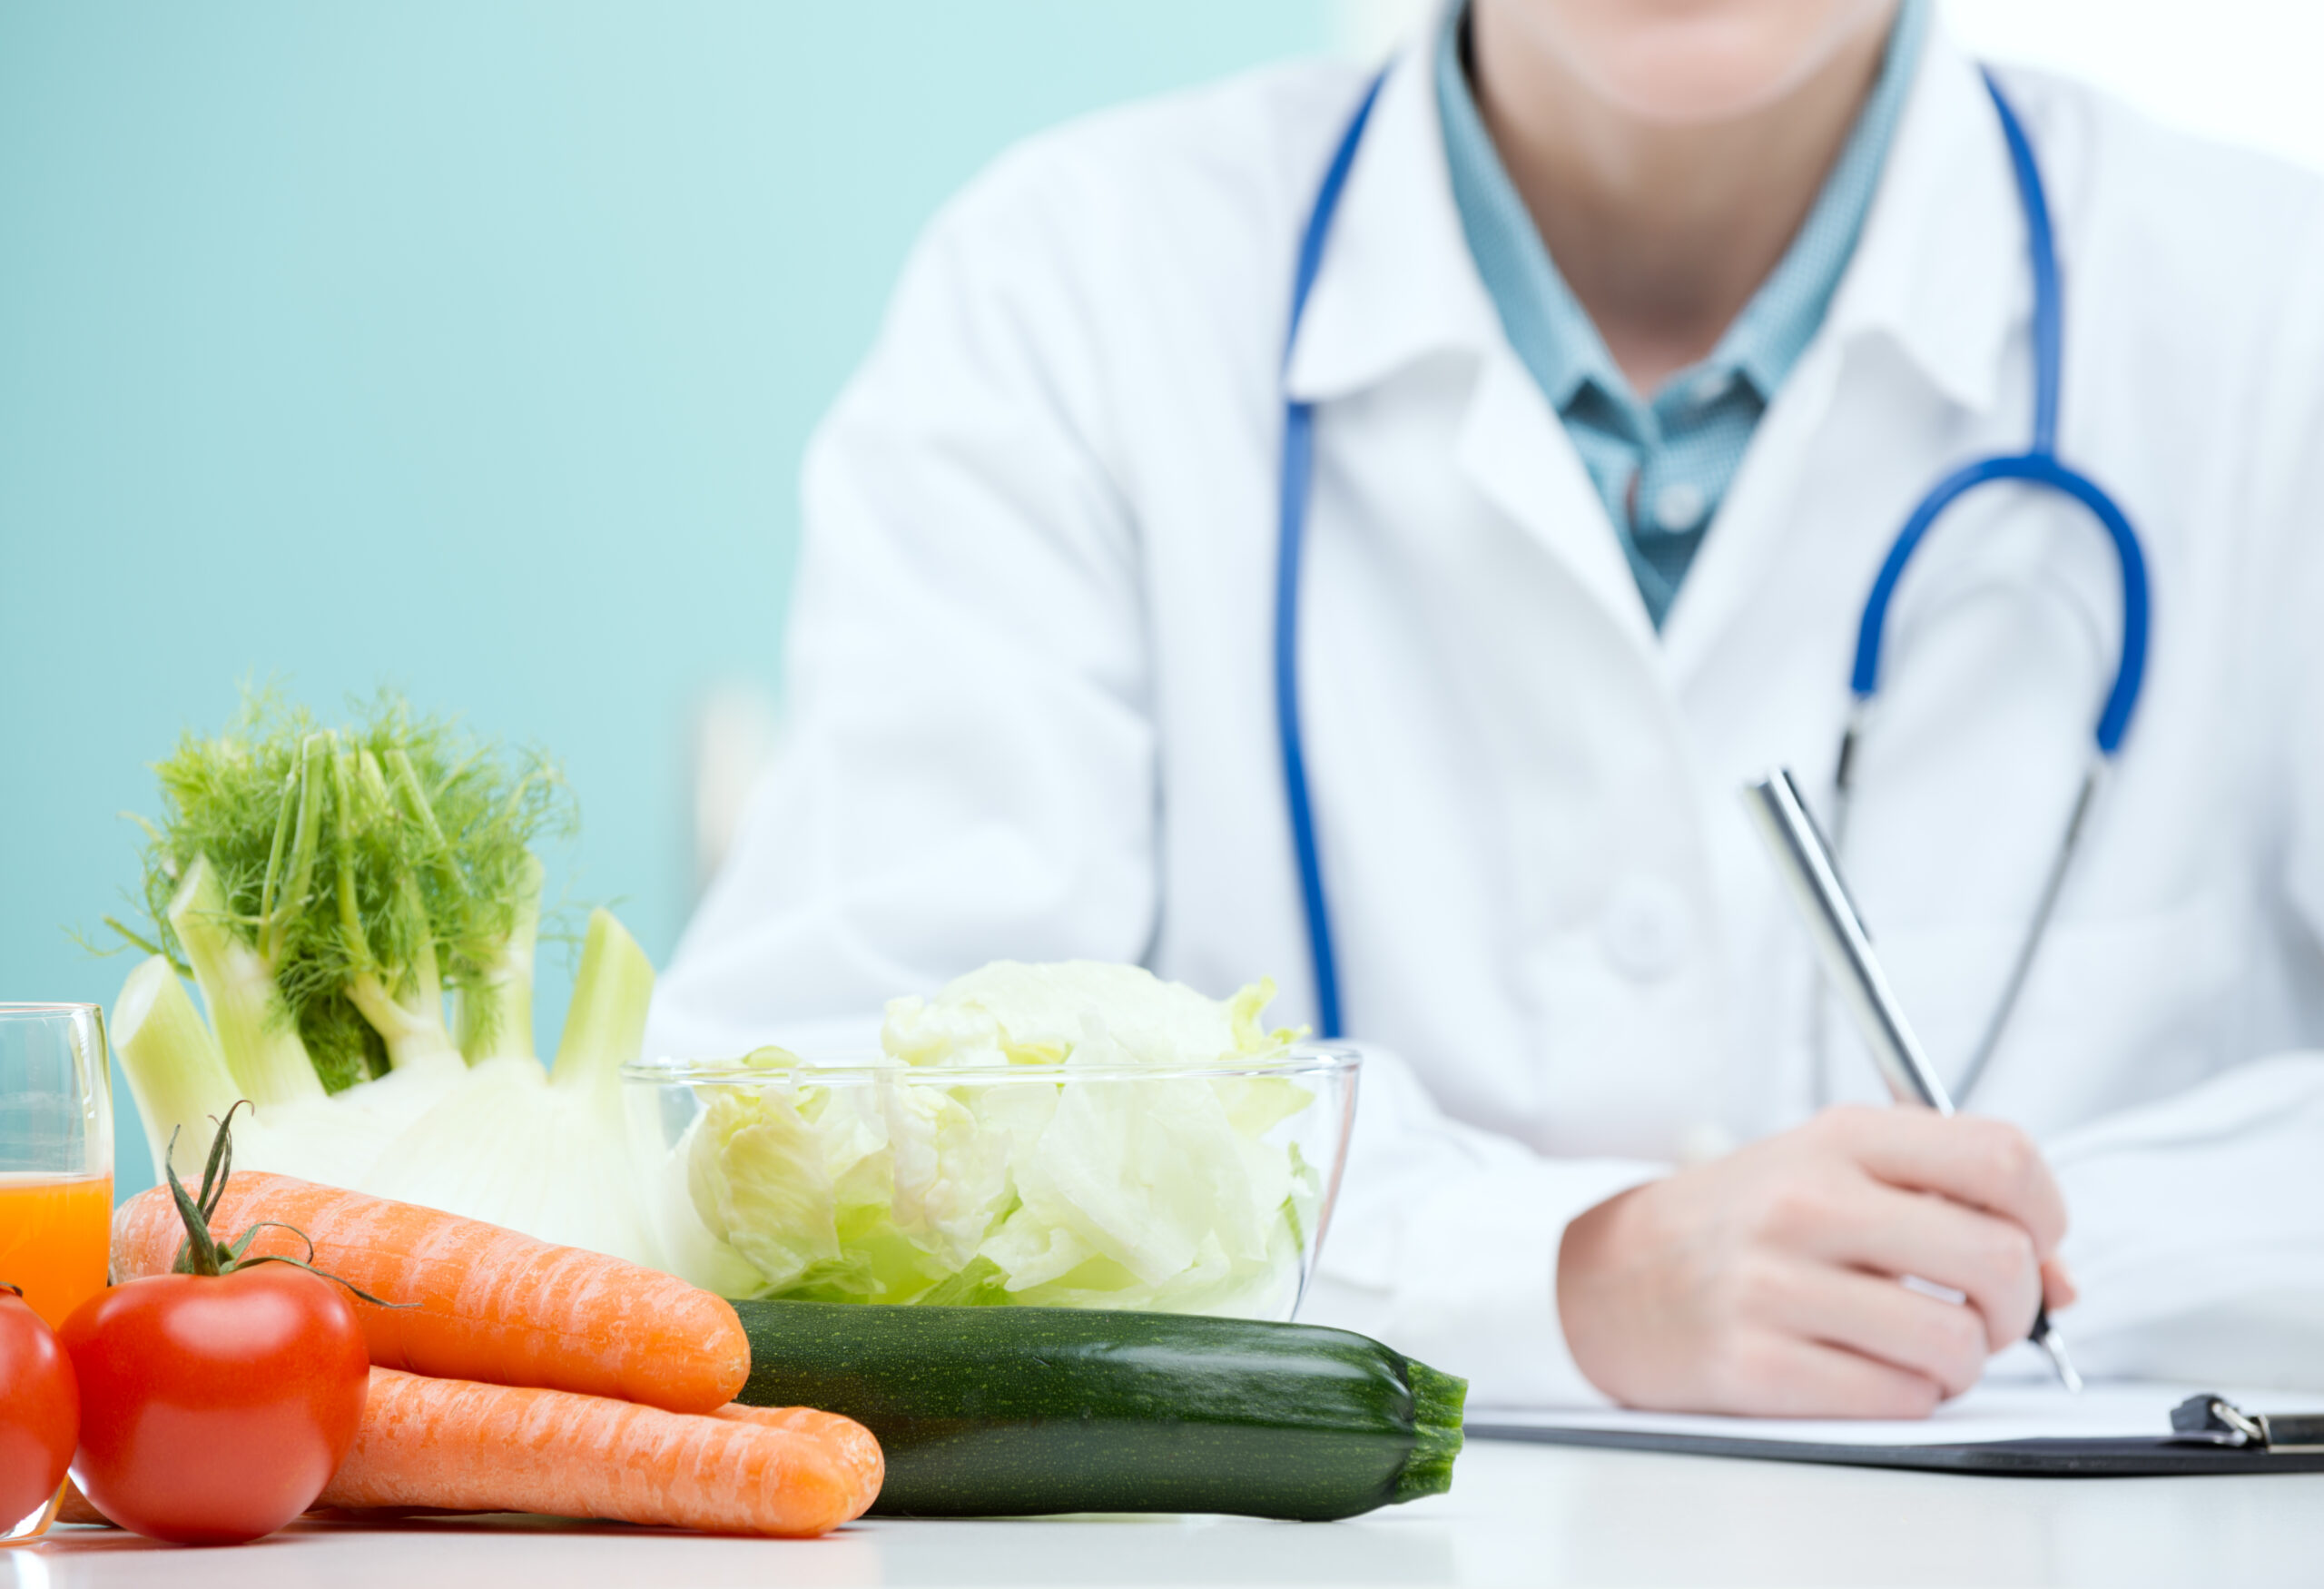 Healthy food prescriptions could save billions in healthcare costs